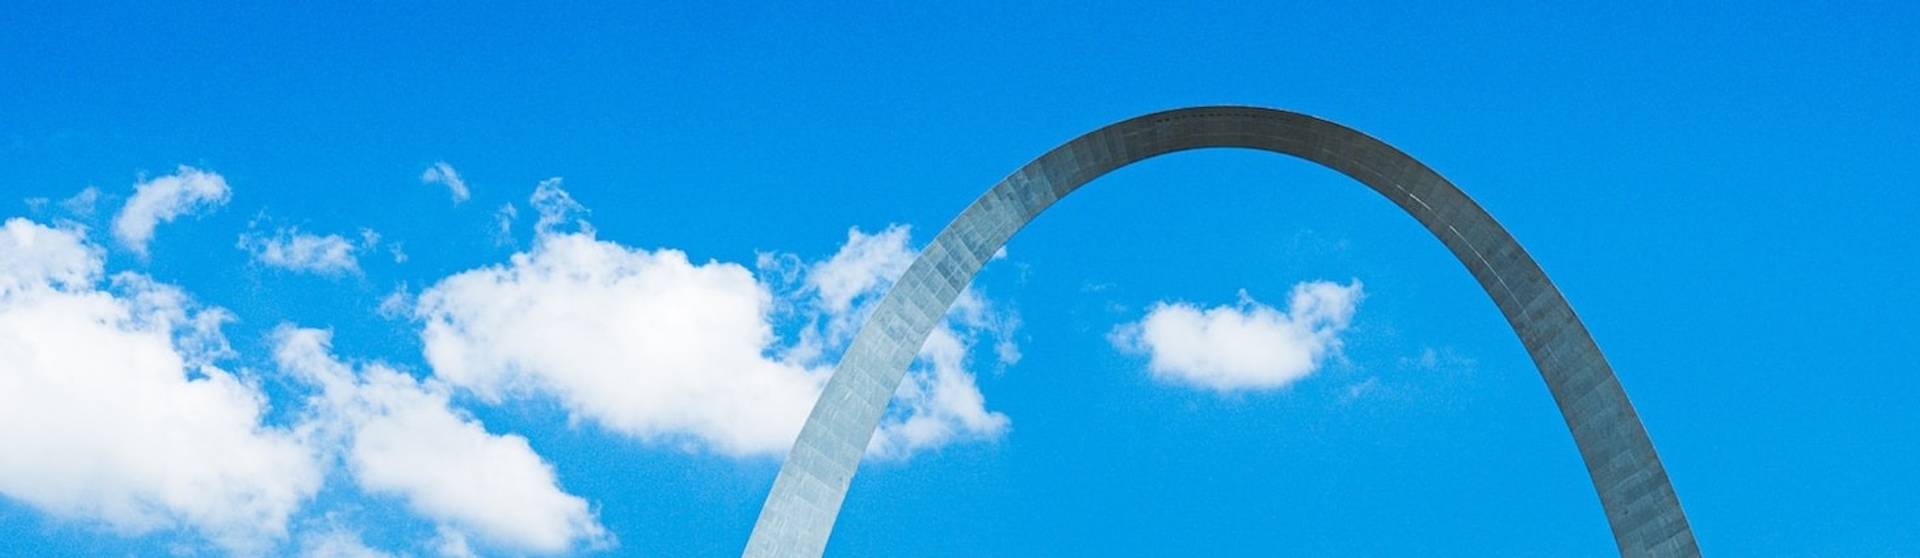 Gateway Arch against blue sky to represent where to buy e-bikes in Missouri